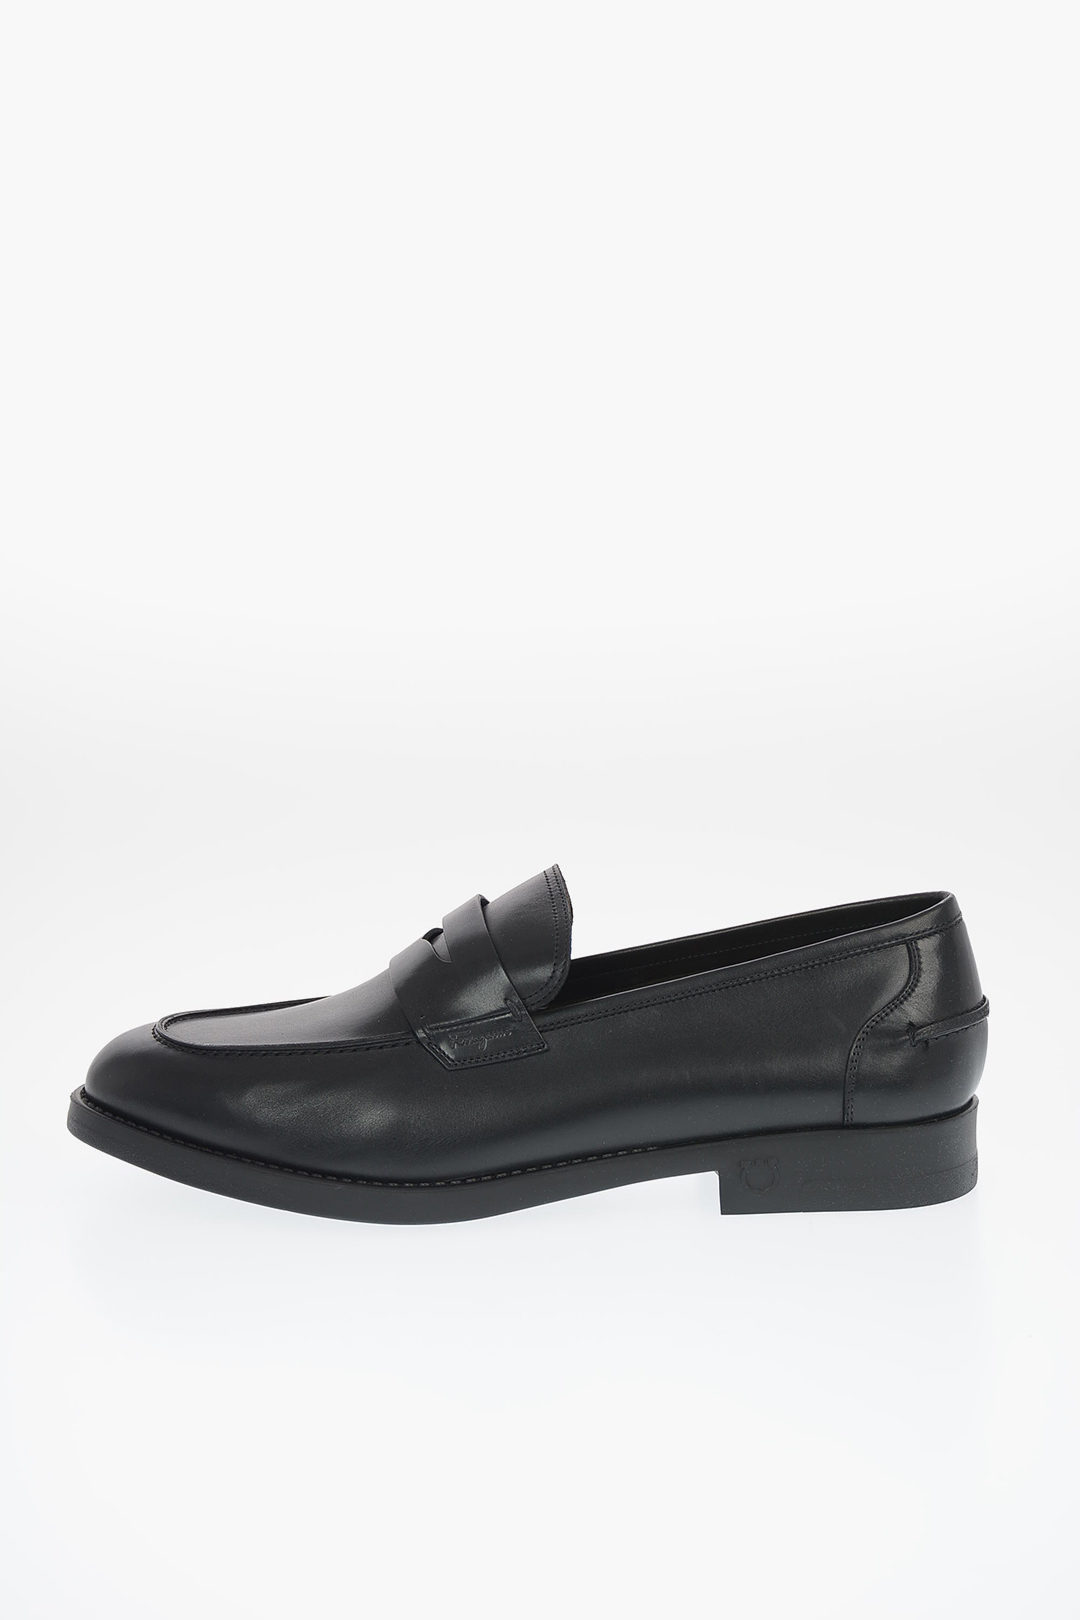 Salvatore Ferragamo Leather AYDEN Penny Loafers men - Glamood Outlet